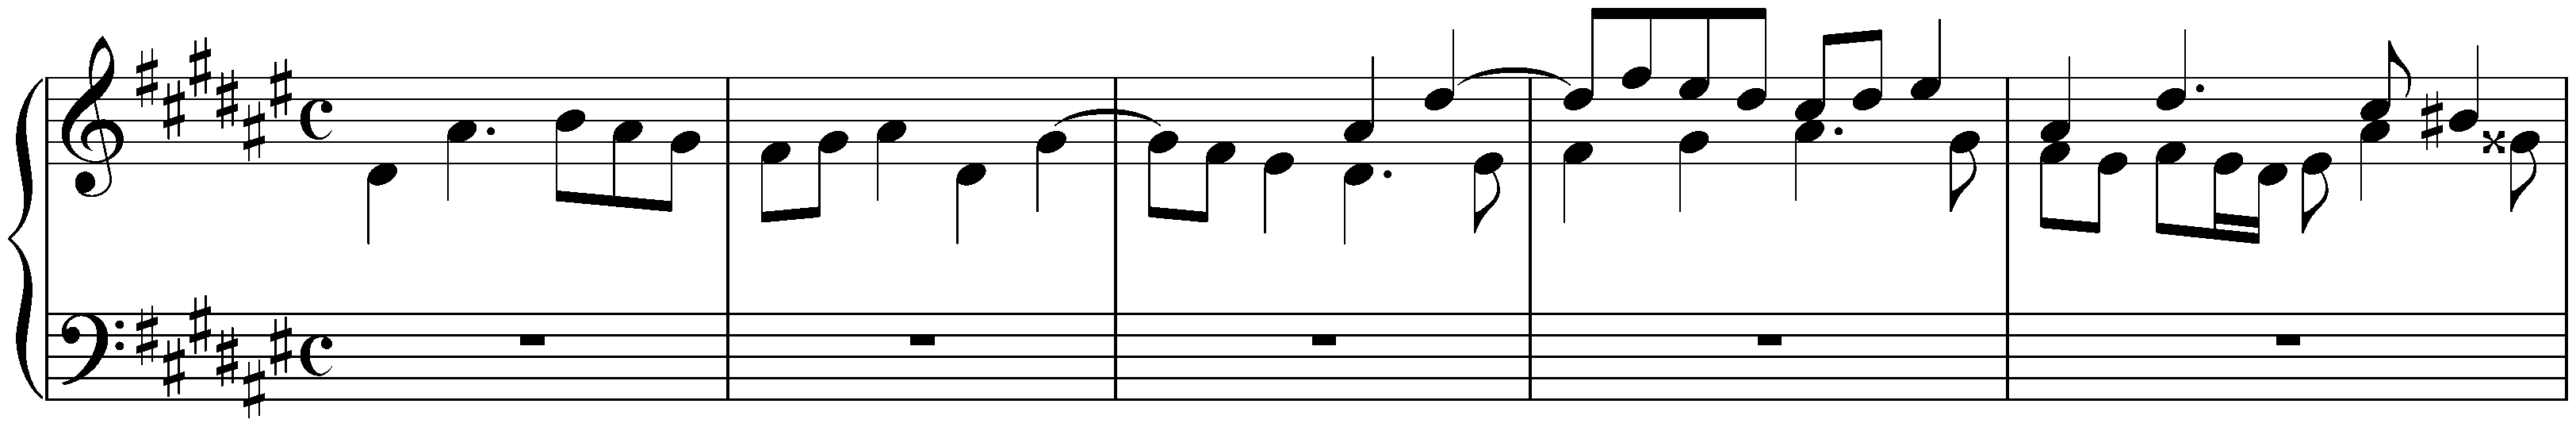 The Well-Tempered Clavier, Book 1, BWV 846–869; 8. E-flat minor, BWV 853, Fugue